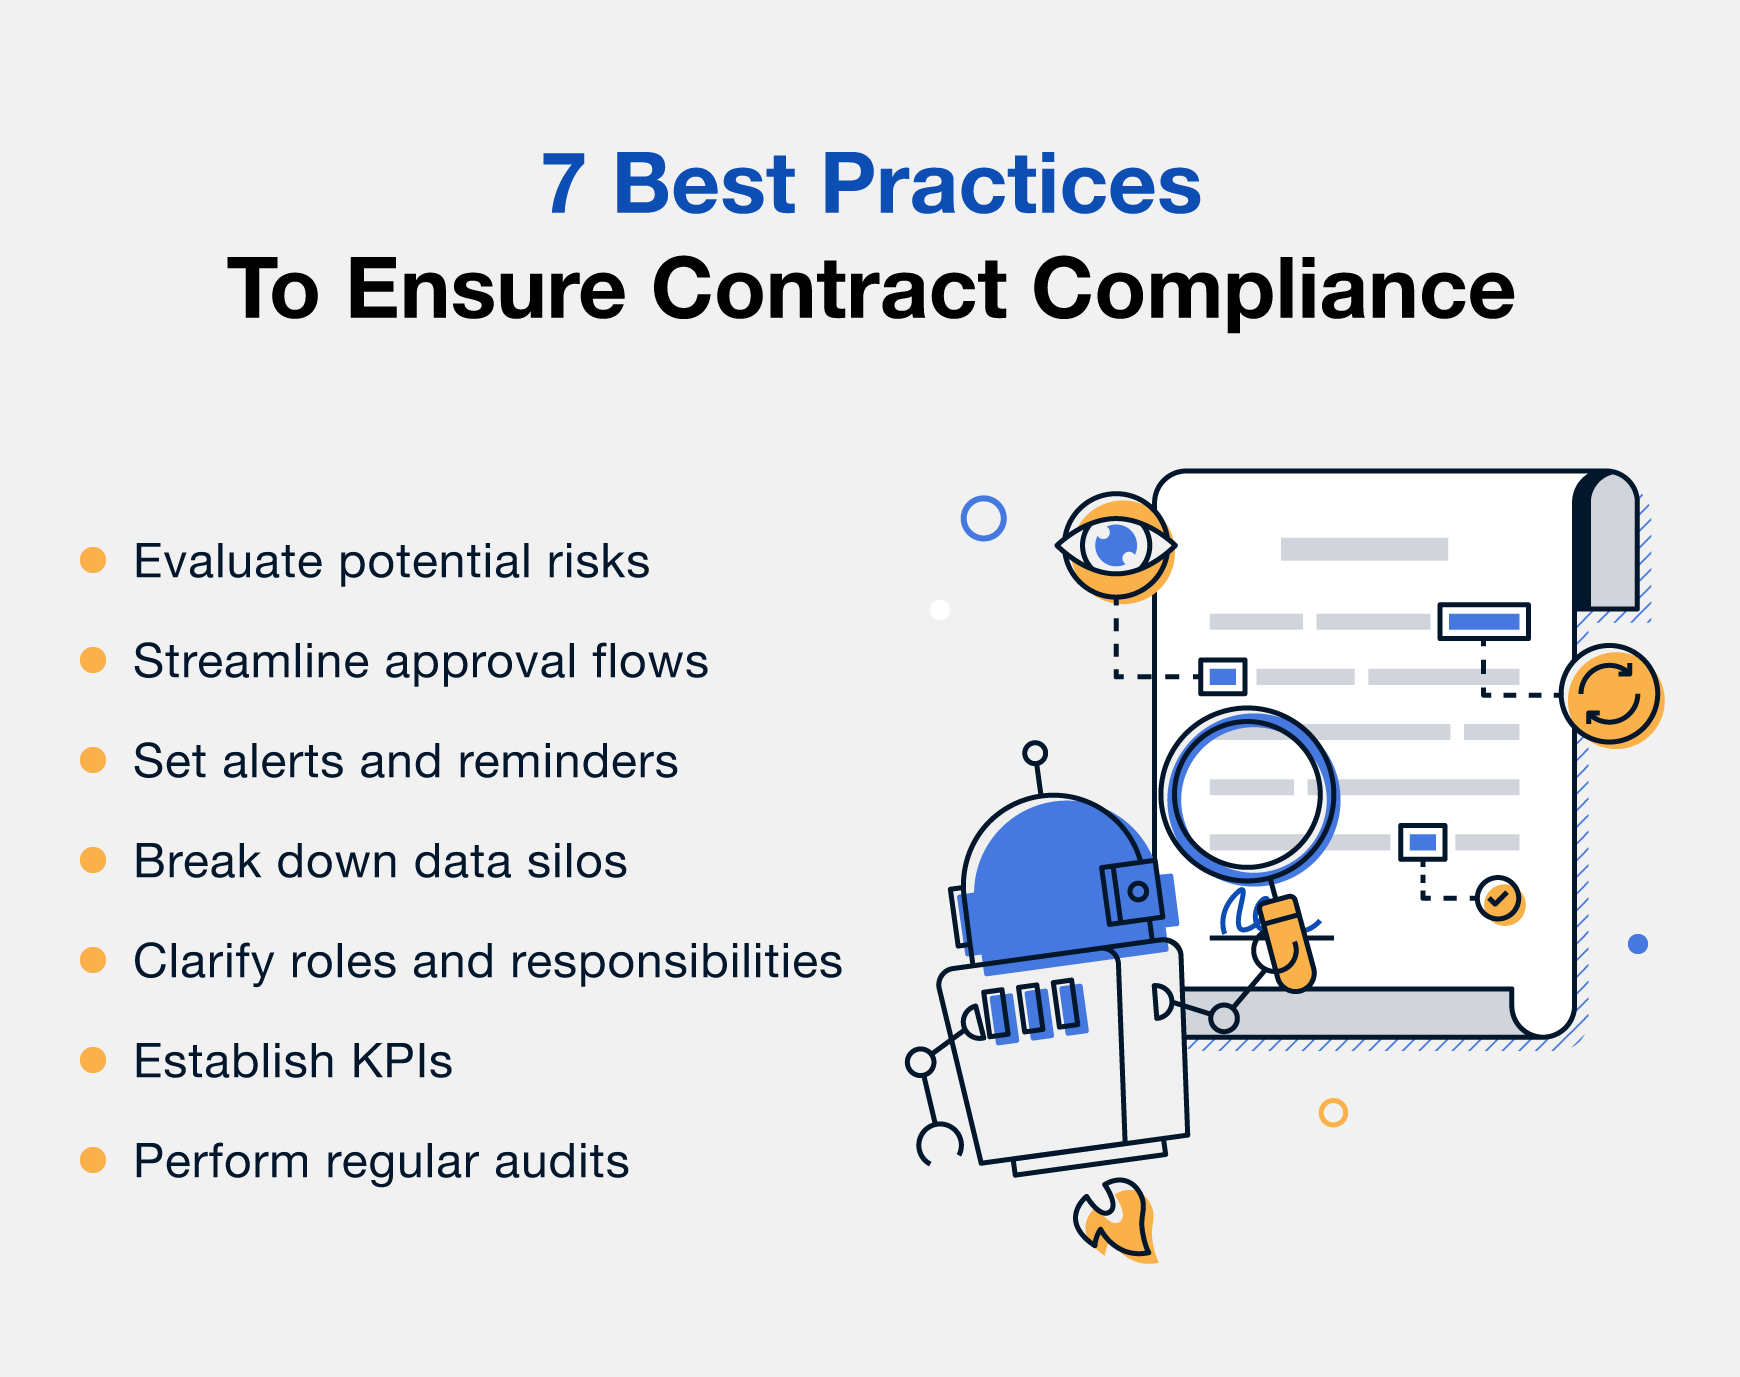 Contract compliance best practices